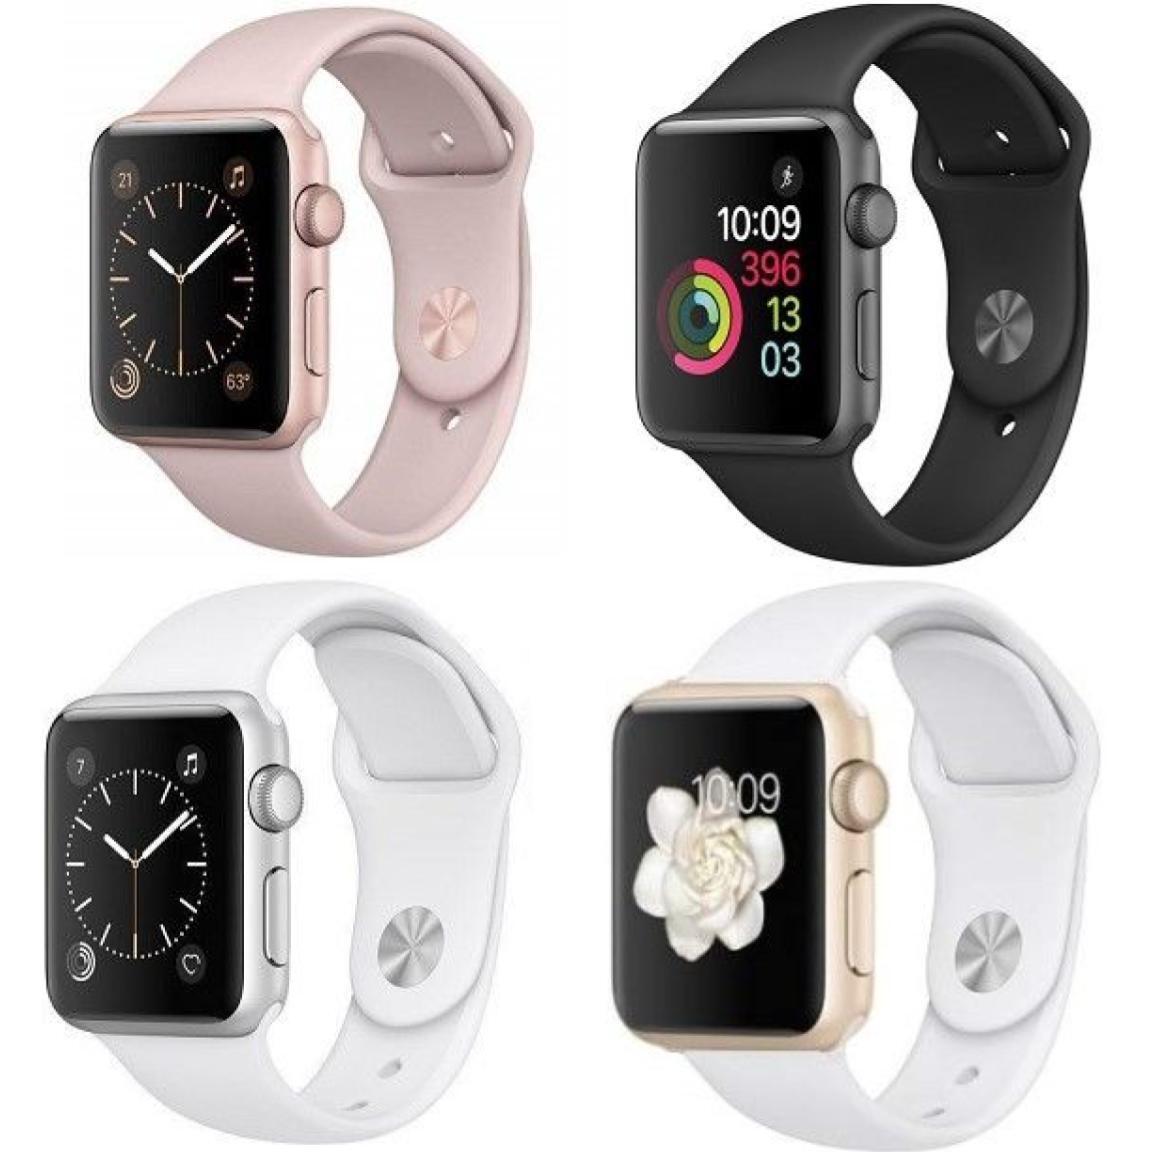 Apple Watch Series 2 - 38mm/42mm - Smartwatch - All Colors - Very 